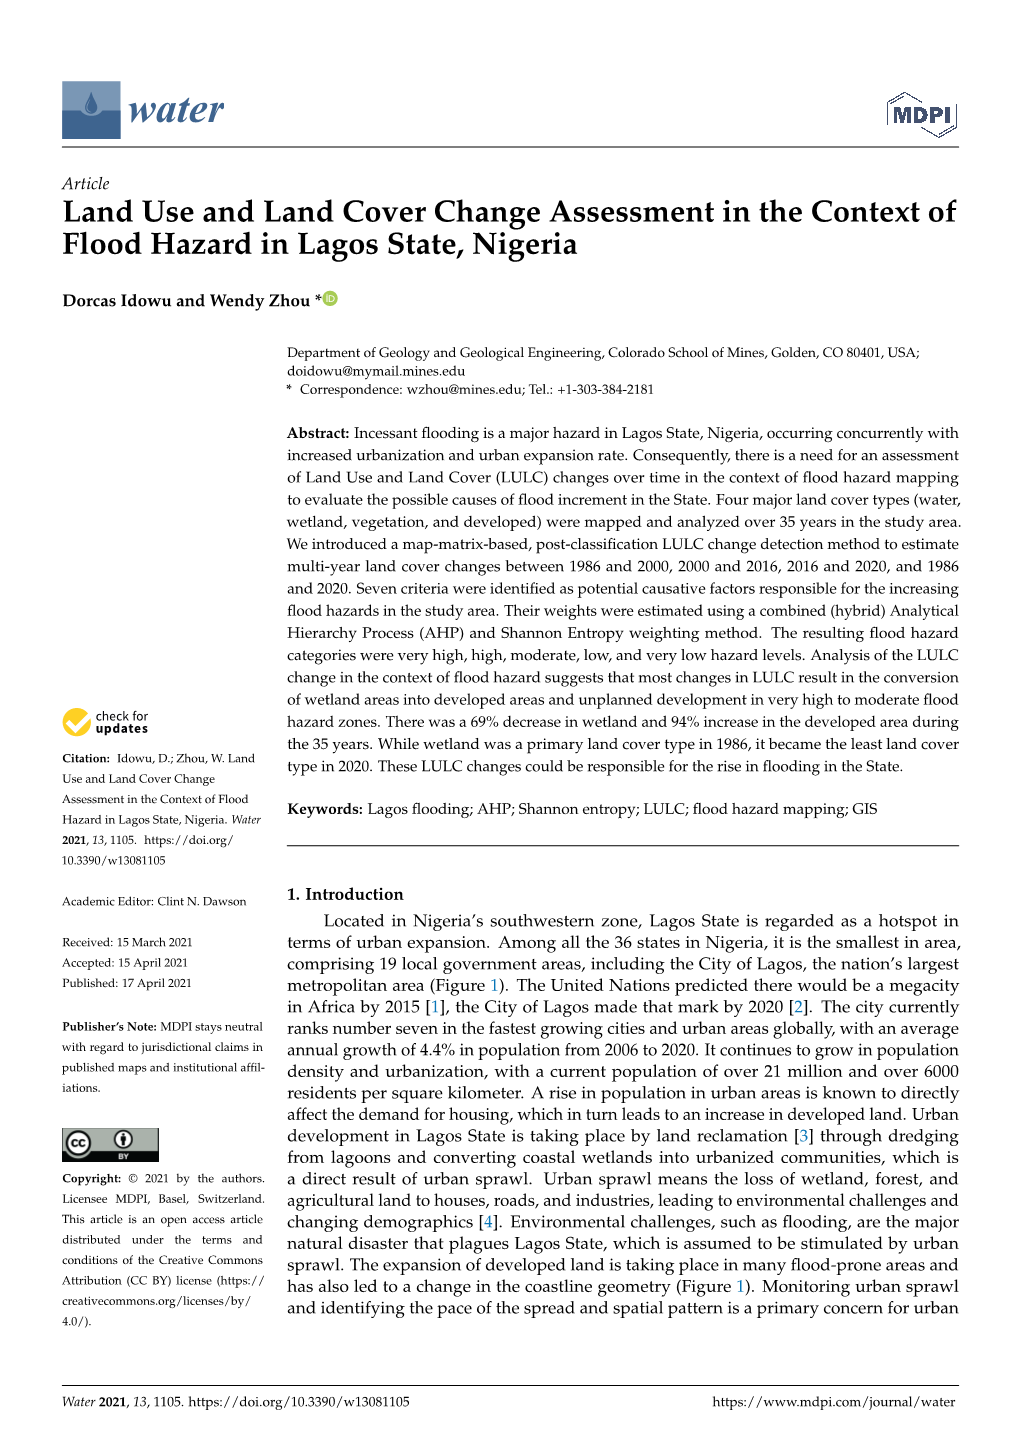 Land Use and Land Cover Change Assessment in the Context of Flood Hazard in Lagos State, Nigeria